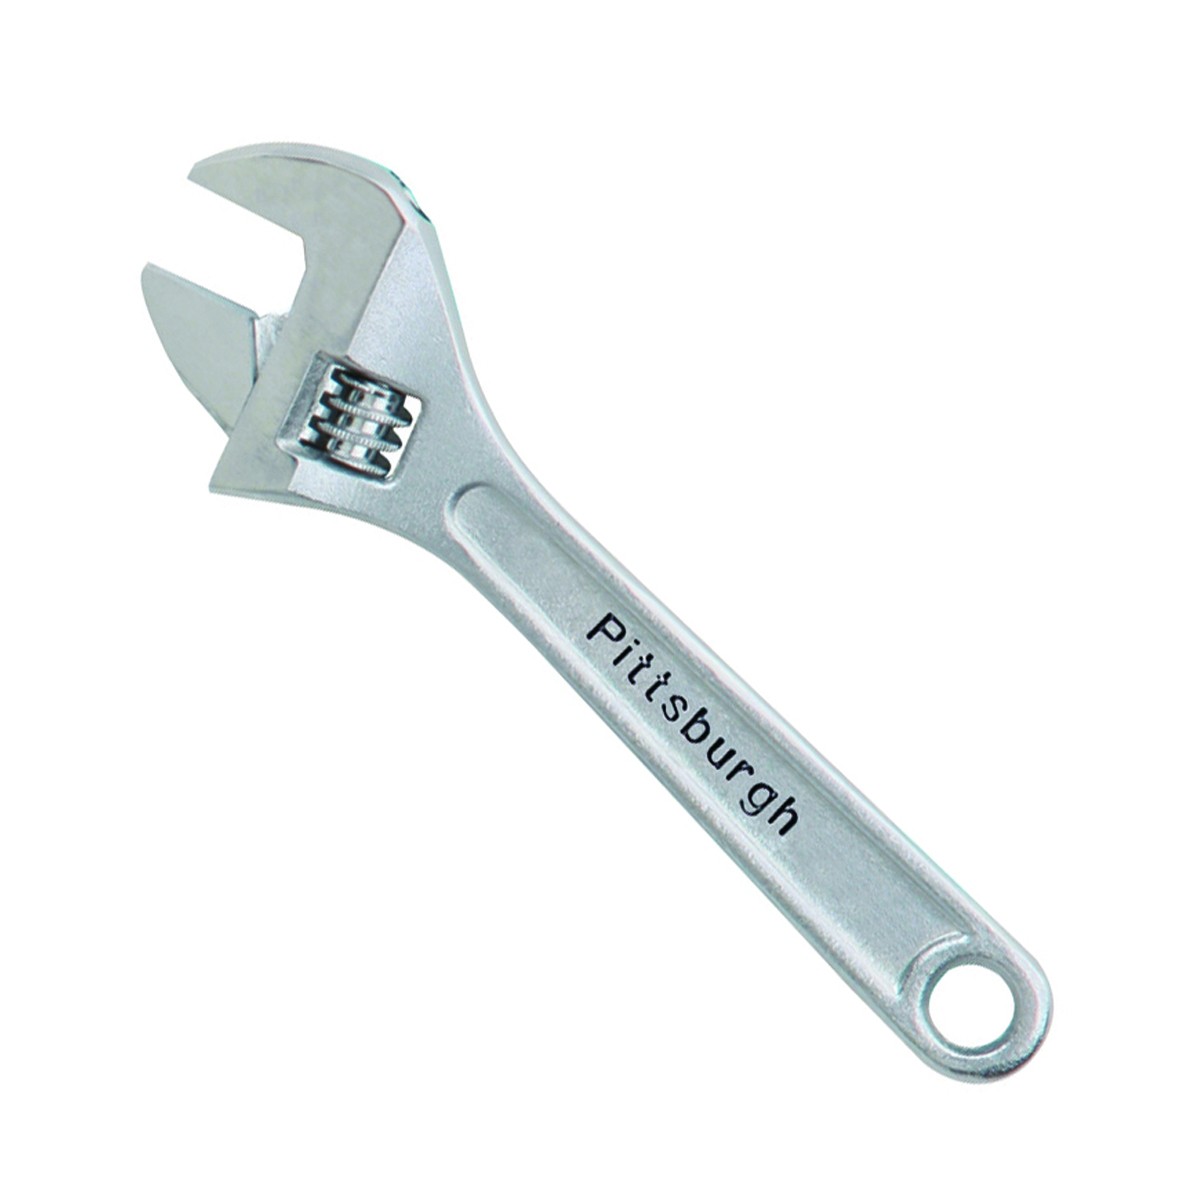 PITTSBURGH 6 in. Steel Adjustable Wrench - Item 67149 / 60716 / 63680 / 69559